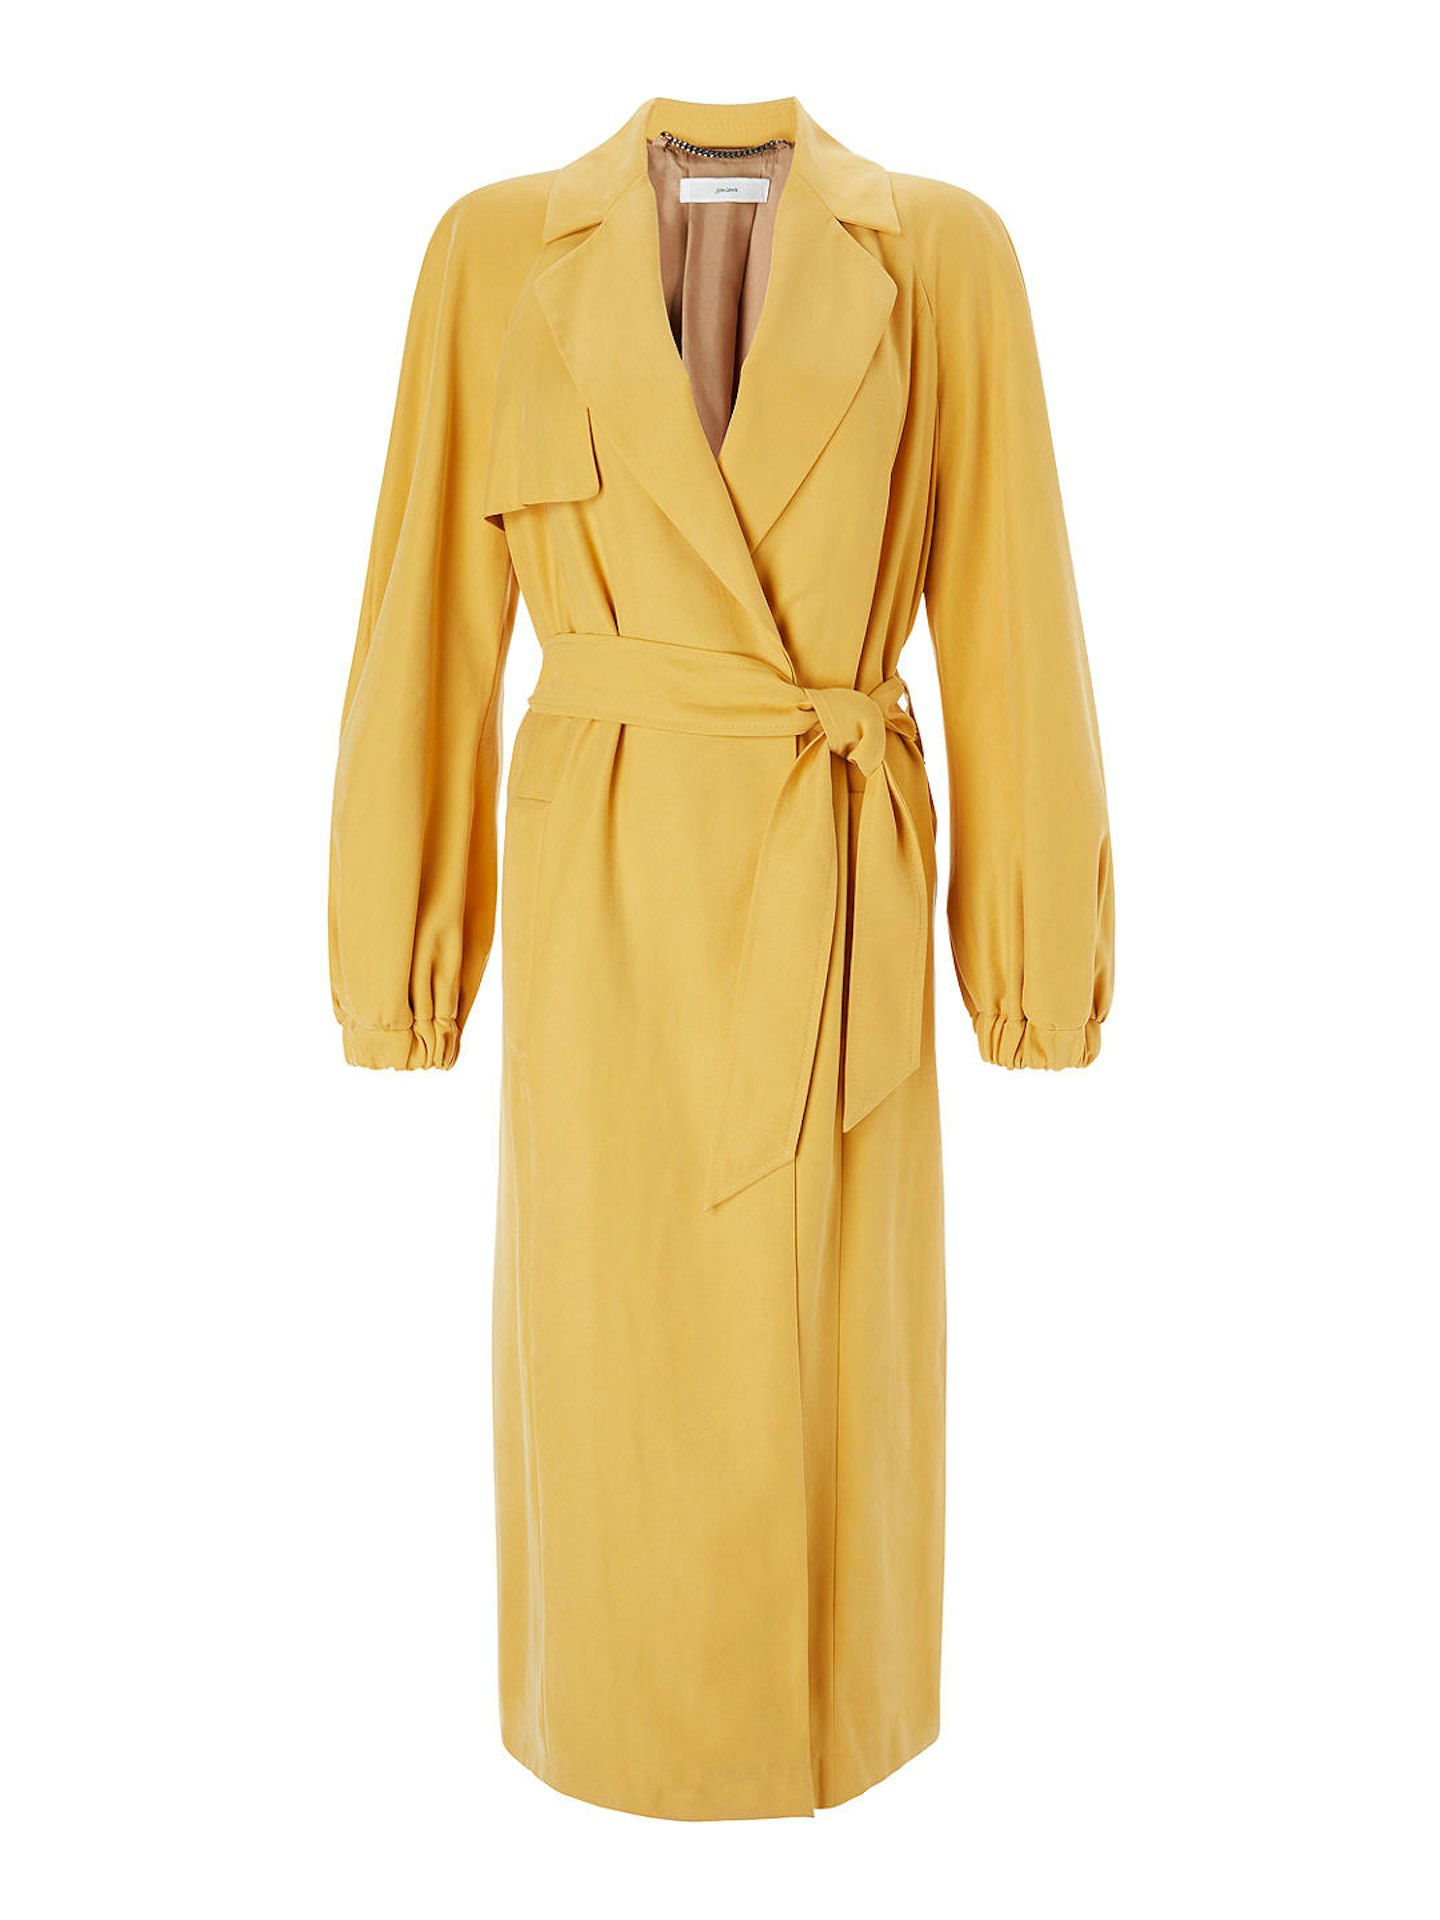 John Lewis & Partners yellow trench coat with sleeves 